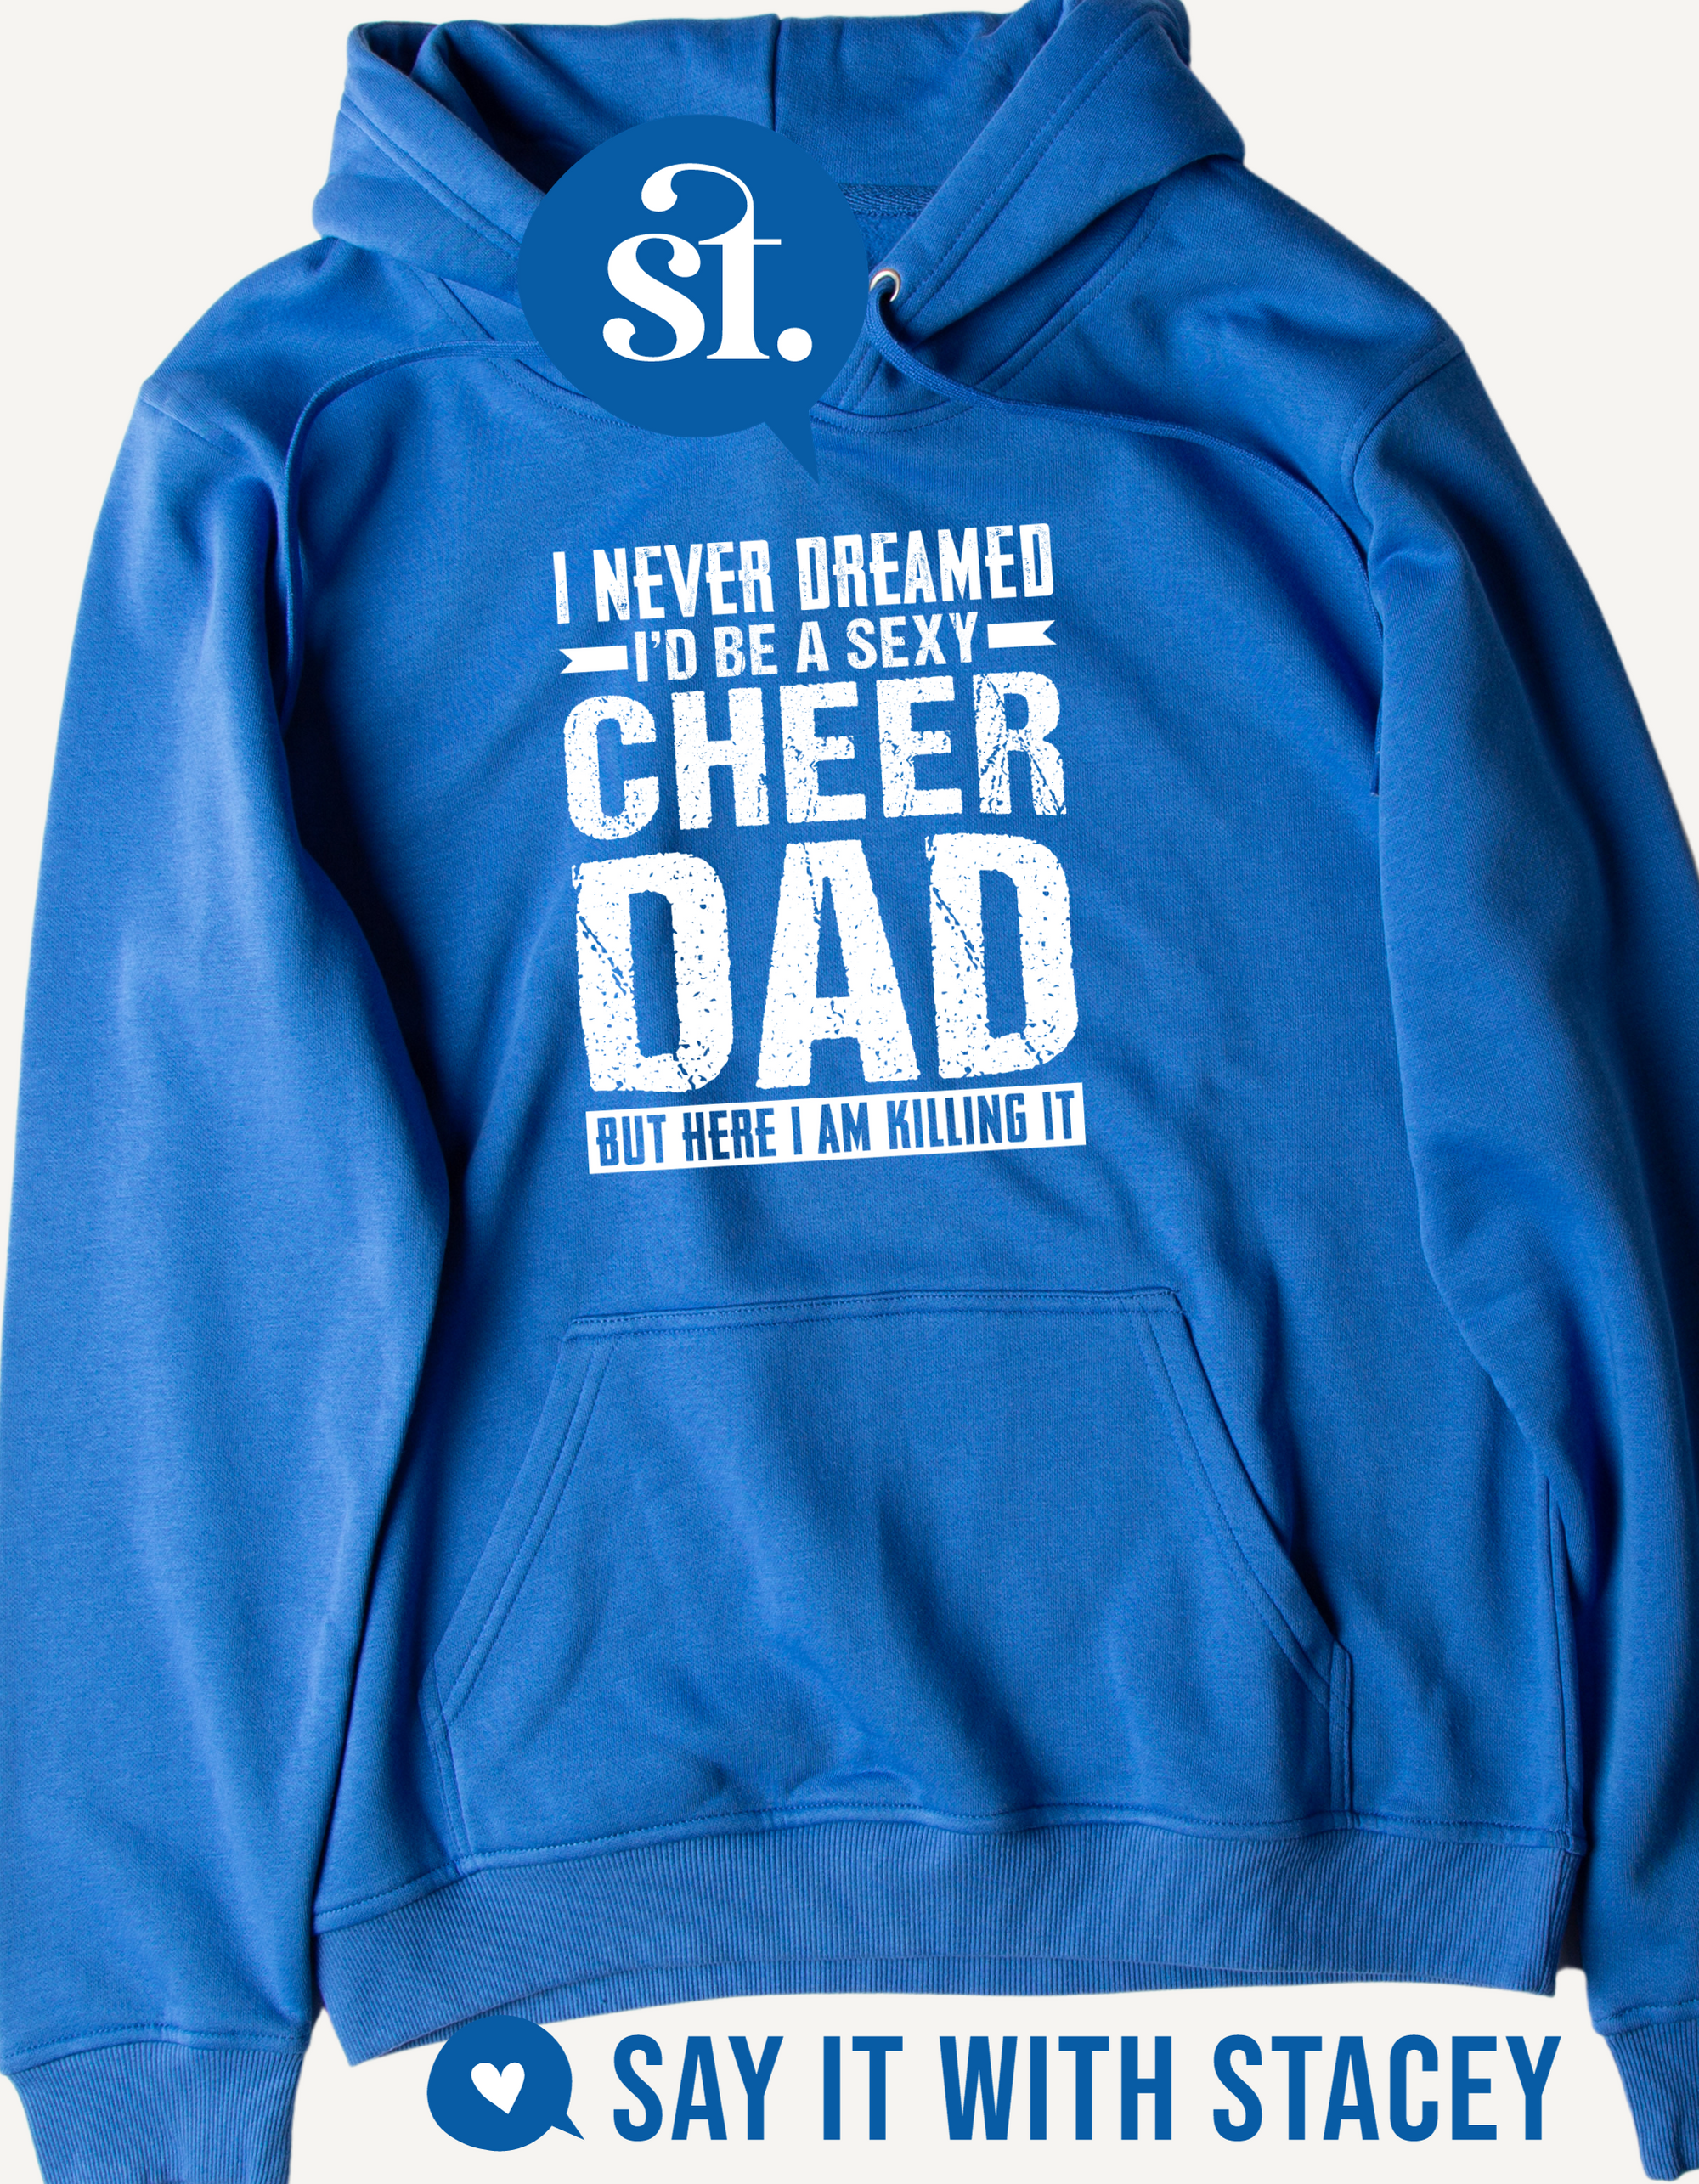 I never dreamed I'd be a sexy cheer dad hoodie, Adult, Royal Blue